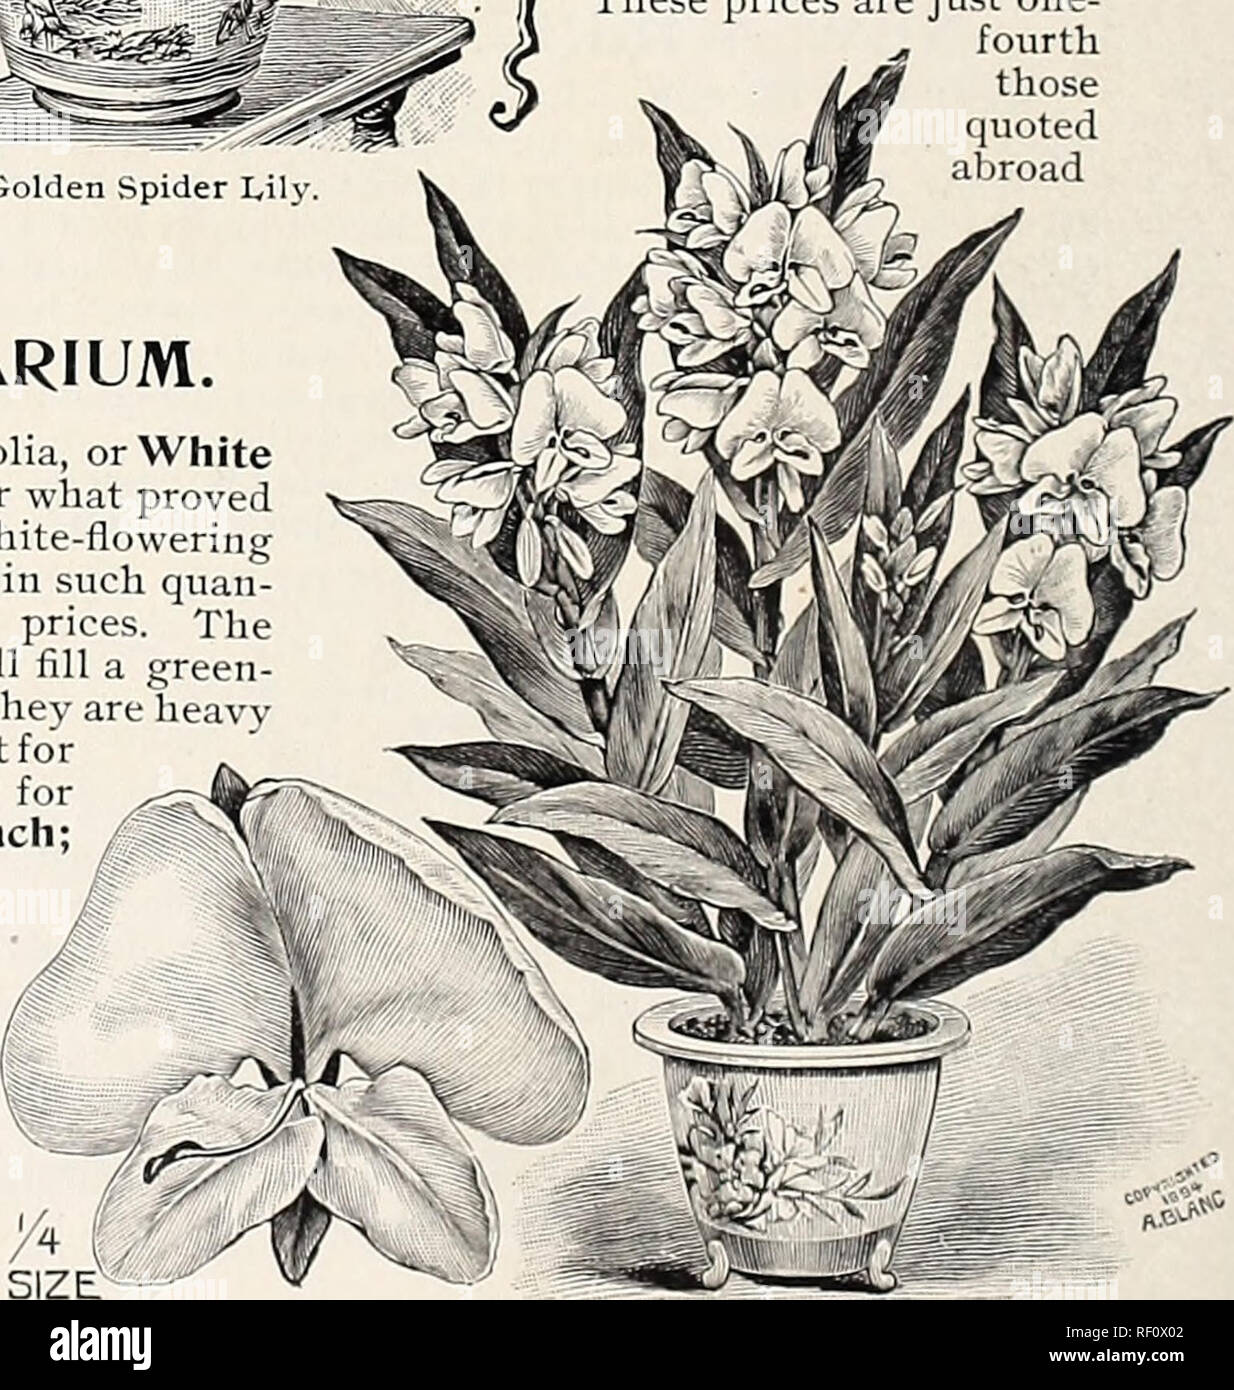 . Catalogue of novelties and specialites : plants bulbs fruits. Nursery stock, Pennsylvania, Philadelphia, Catalogs; Plants, Ornamental, Catalogs; Flowers, Catalogs; Fruit, Catalogs; Nursery stock; Plants, Ornamental; Flowers; Fruit. HEDYCHIUM CORONARIUM. Under the name of Myrosma Cannaefolia, or White Canna, we paid $250 per 100 last year for what proved to be this very fine, sweet-scented, white-flowering tuberous plant. We have propagated it in such quan- tities that we now offer it at popular prices. The flowers are so sweet that a single one will fill a green- house with its fragrance, an Stock Photo